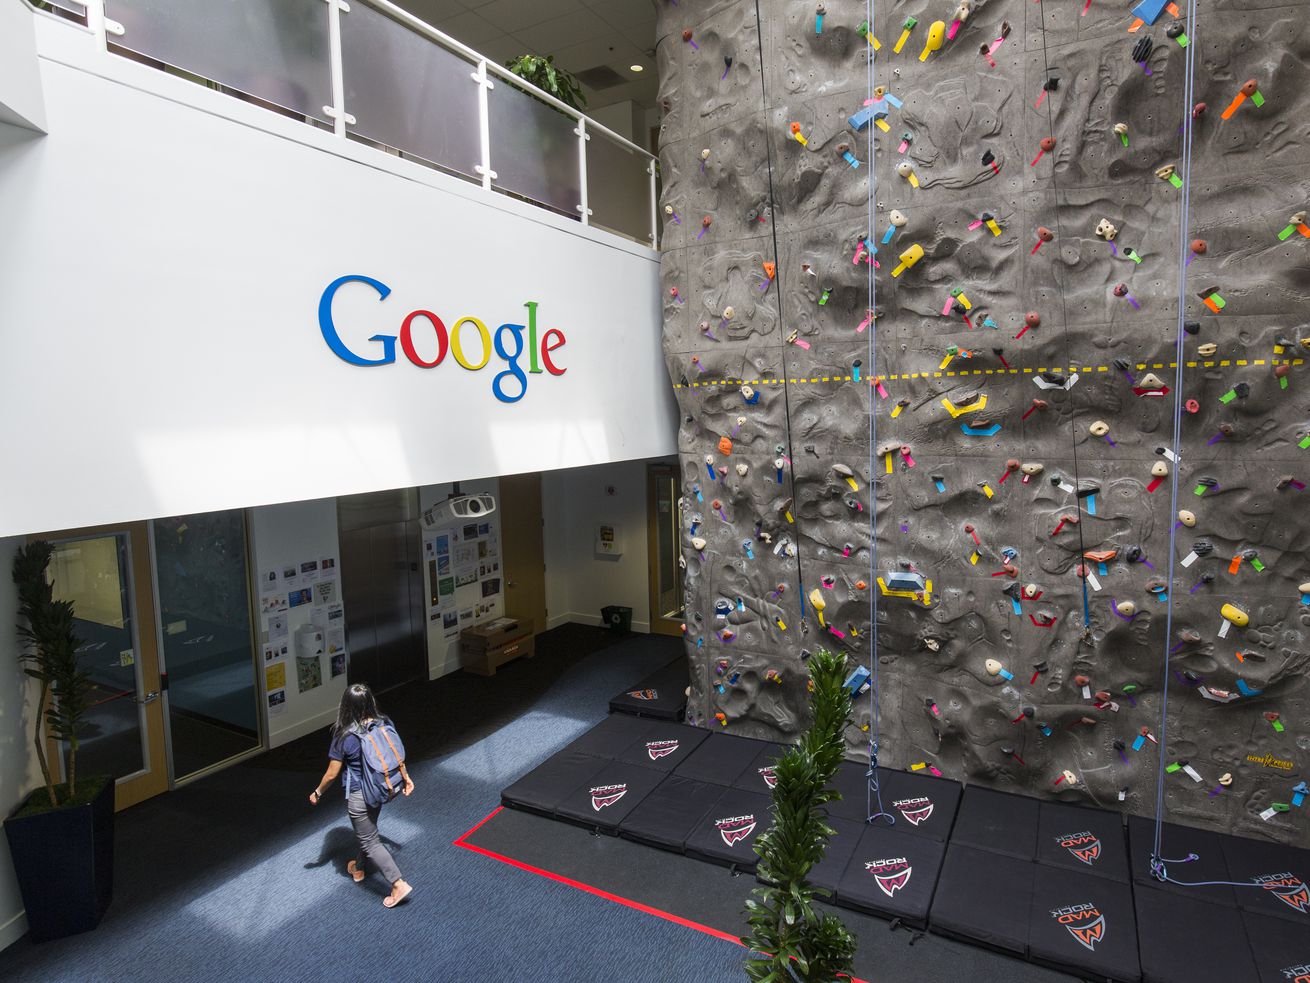 The inside of Google’s corporate headquarters, showing an indoor rock-climbing wall, with no one using it, and a person exiting.